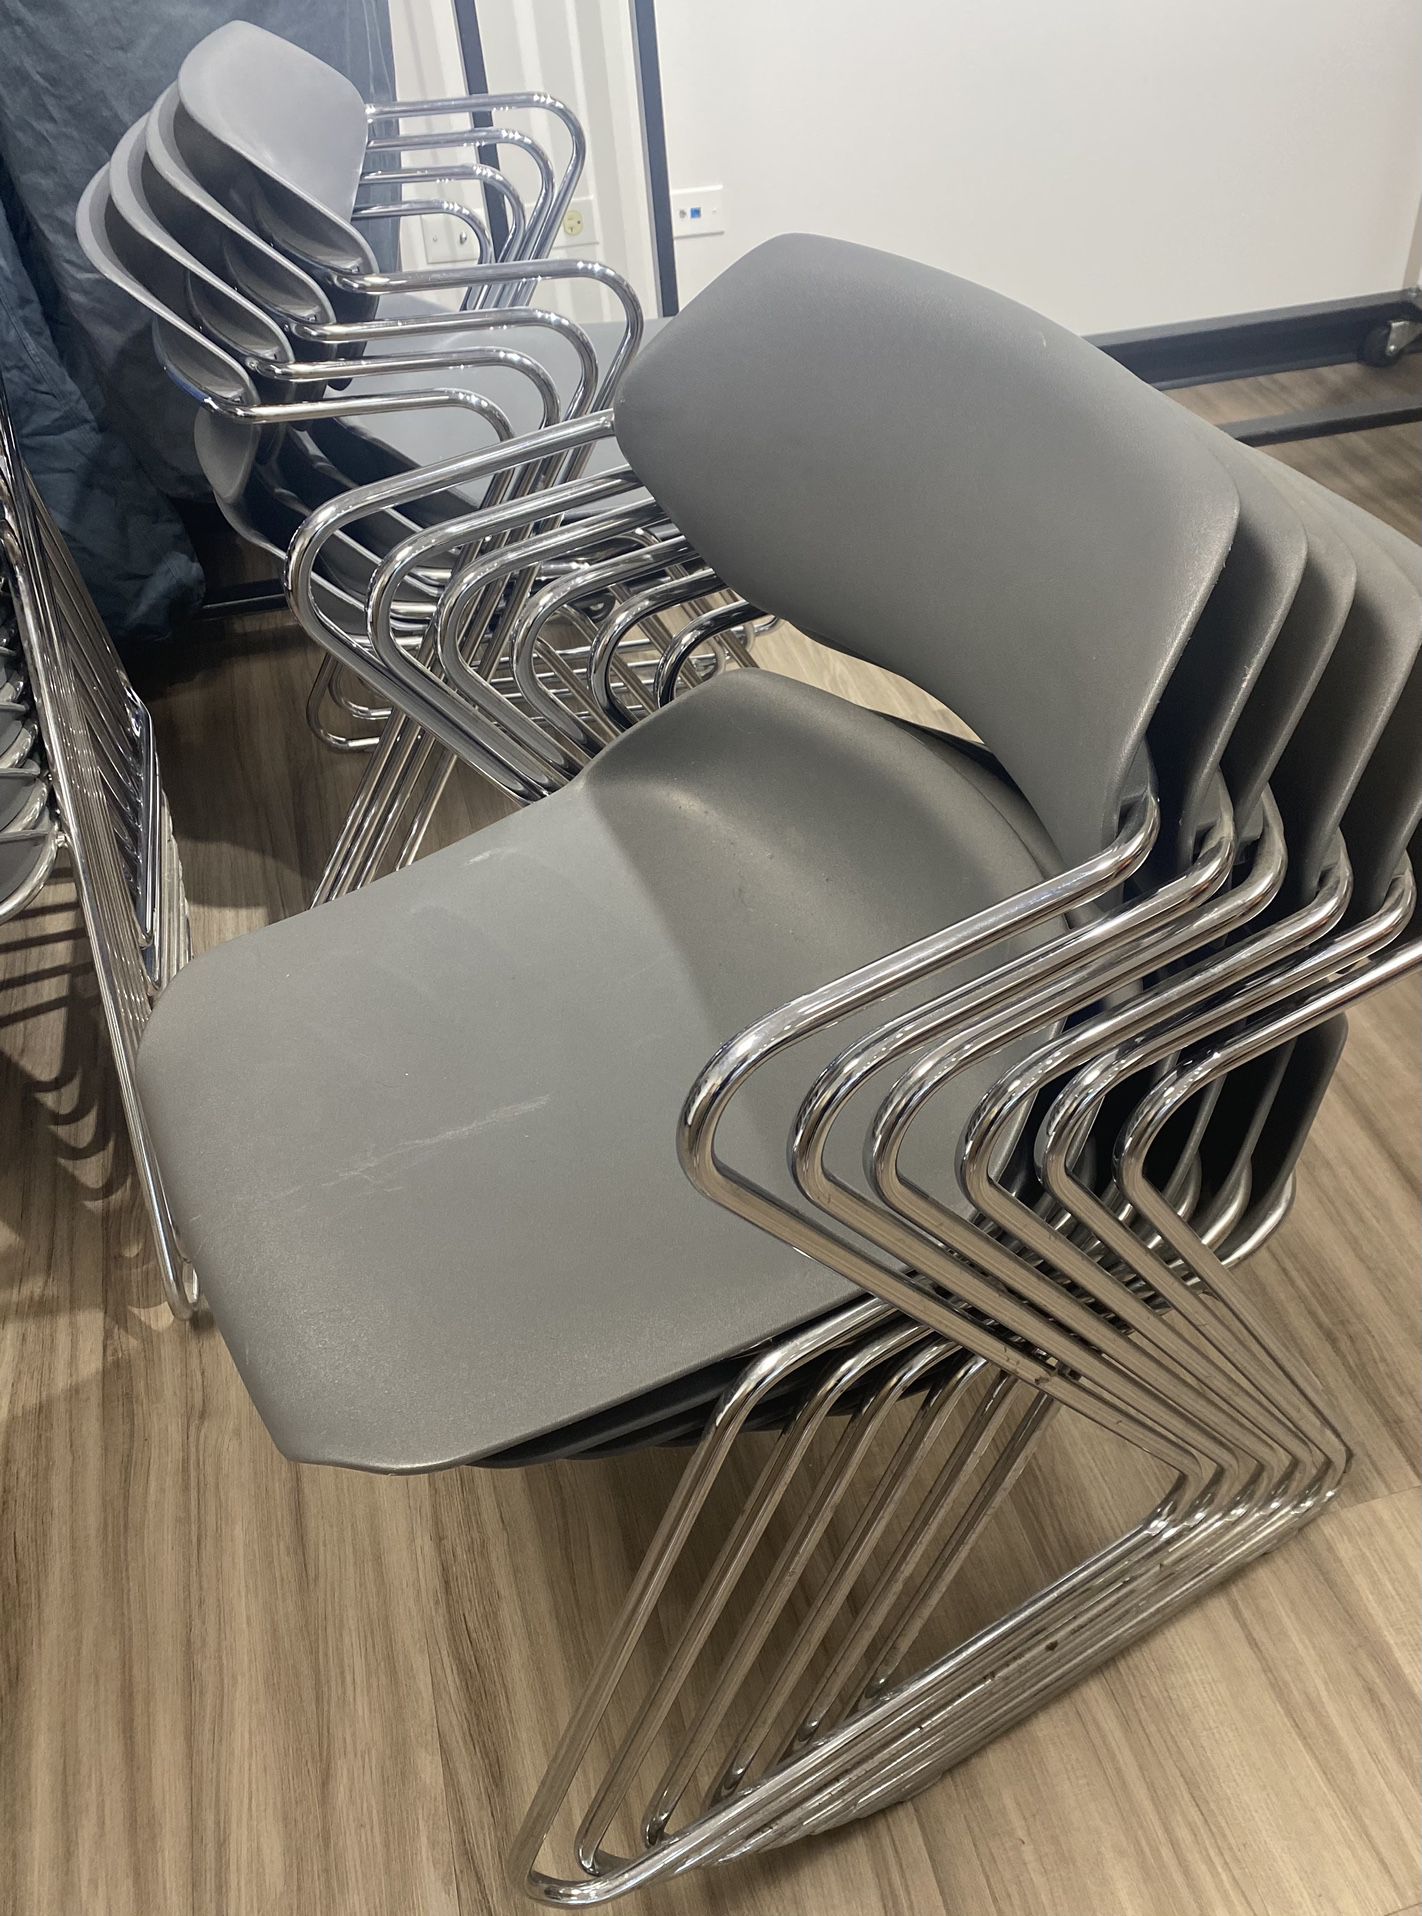 21 American Seating™️ Acton Stackers chairs